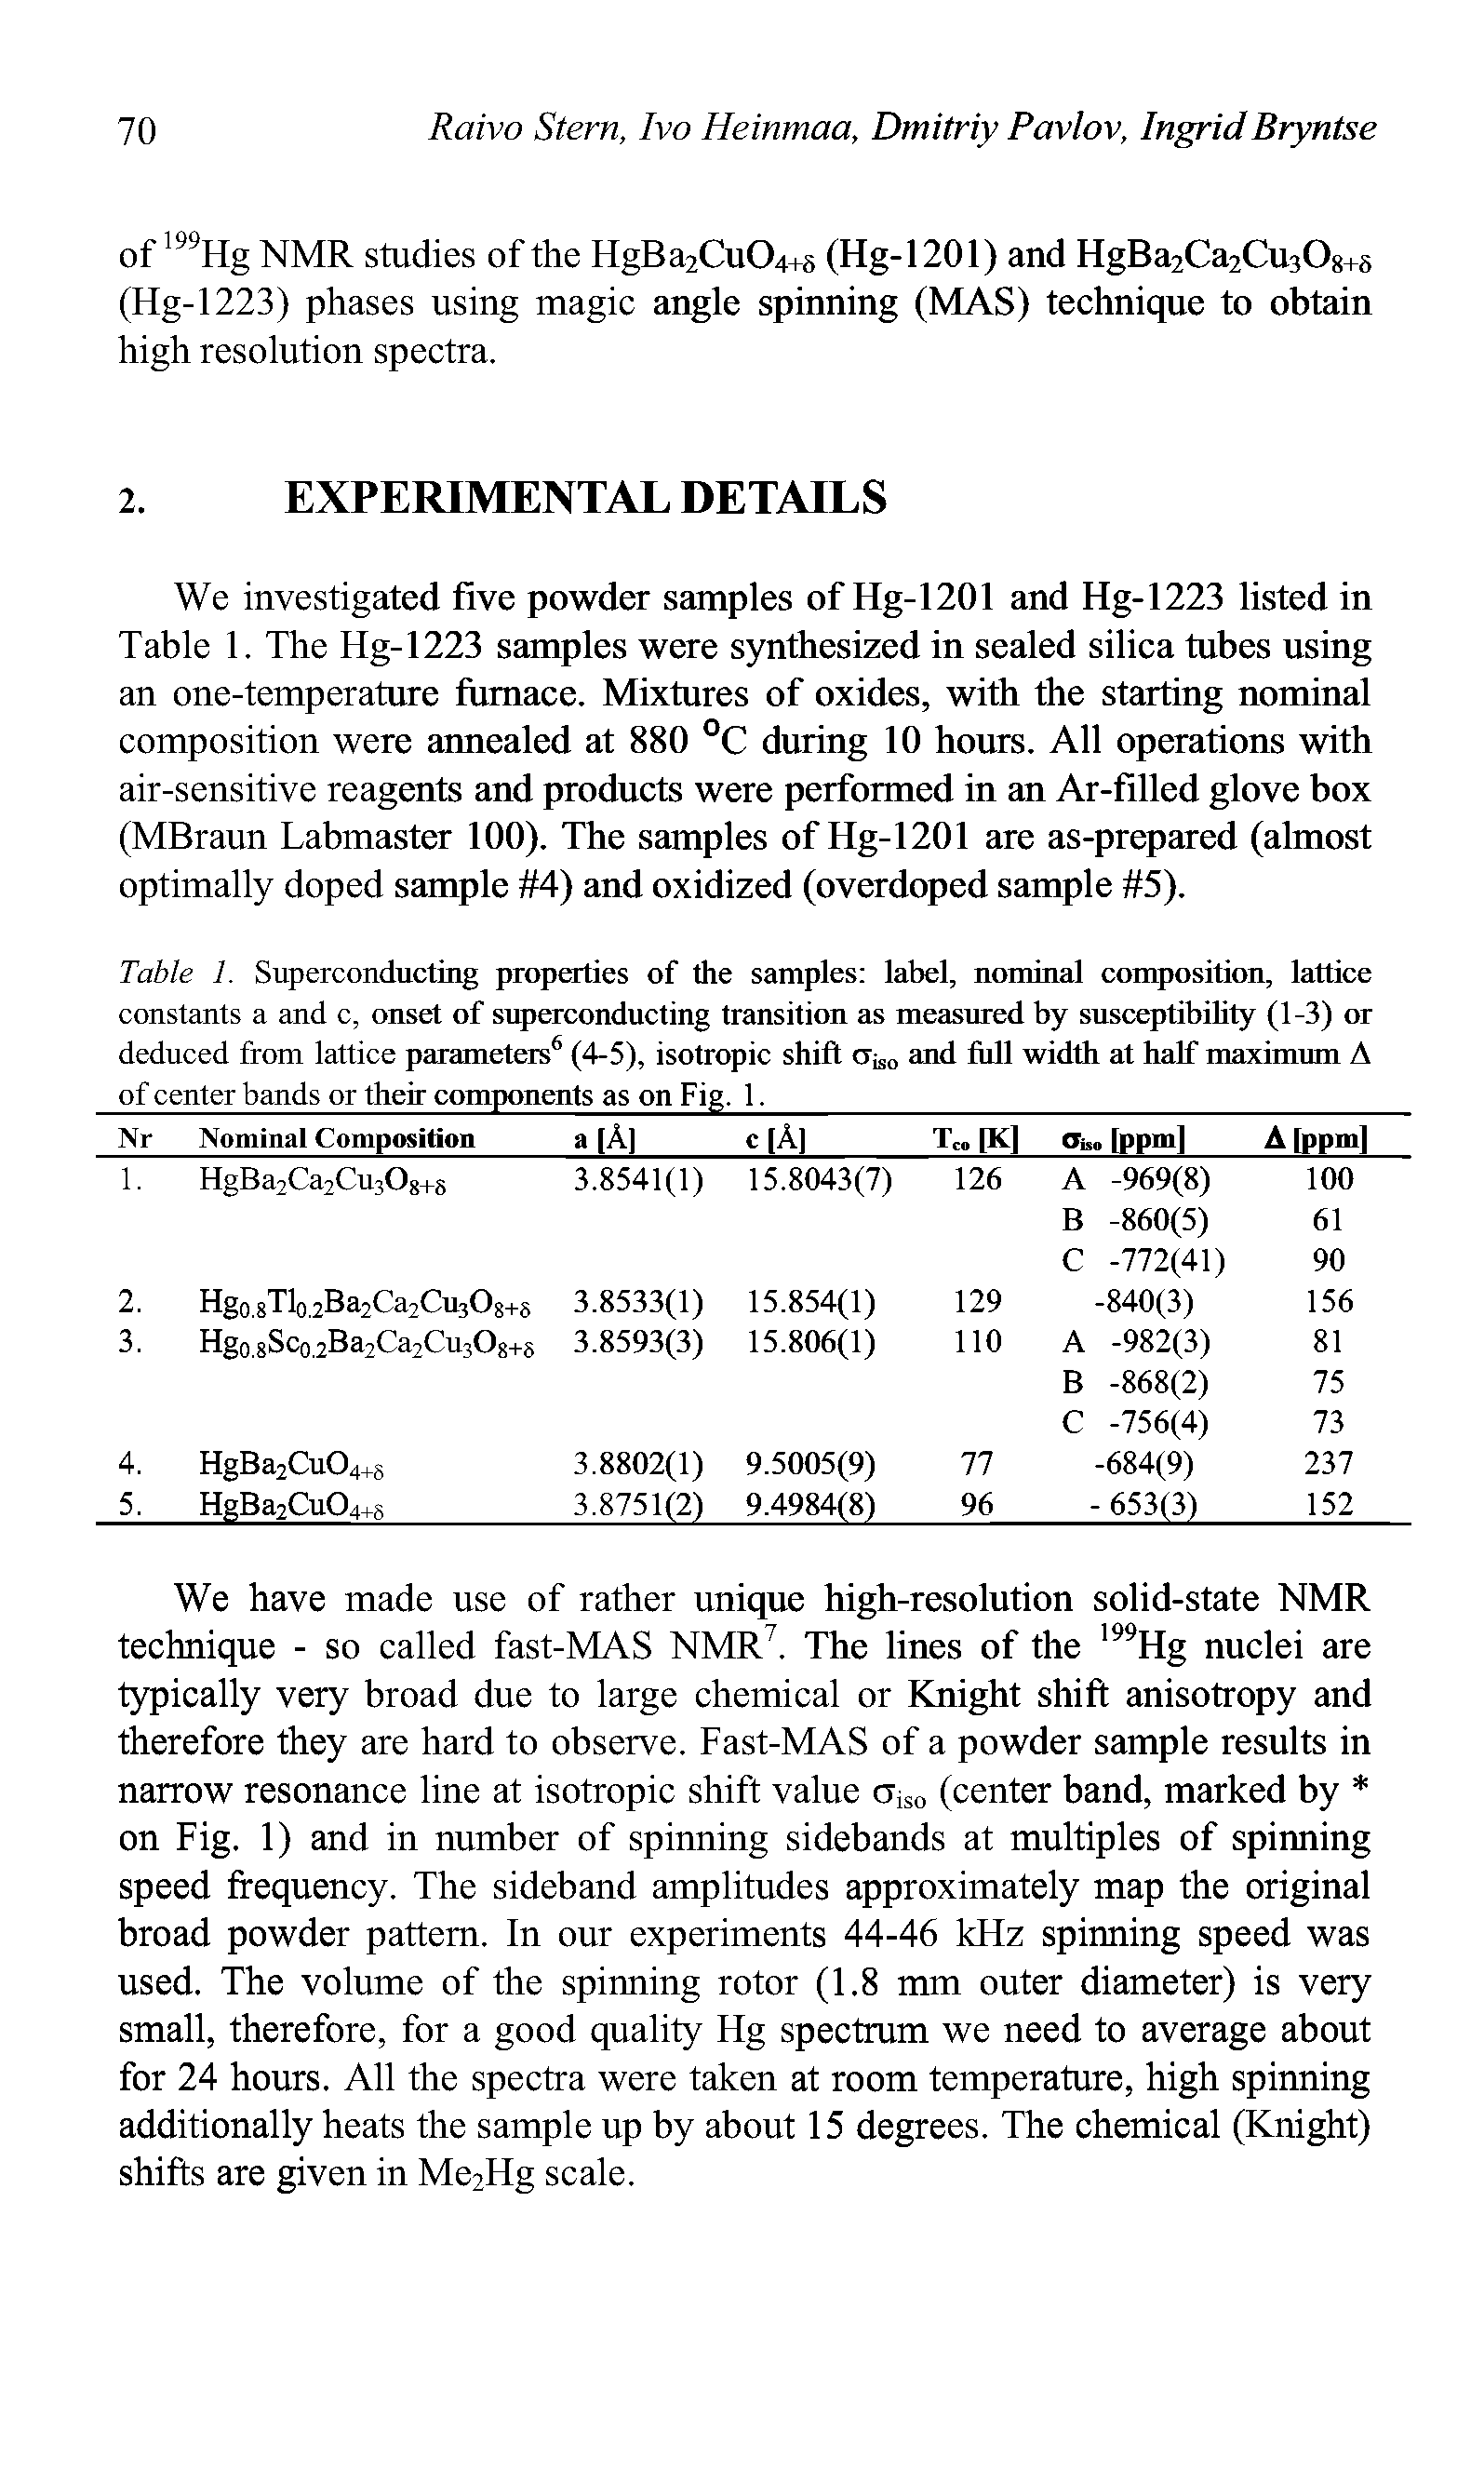 Table 1. Superconducting properties of the samples label, nominal composition, lattice constants a and c, onset of superconducting transition as measured by susceptibility (1-3) or deduced from lattice parameters6 (4-5), isotropic shift CT so and fidl width at half maximum A...